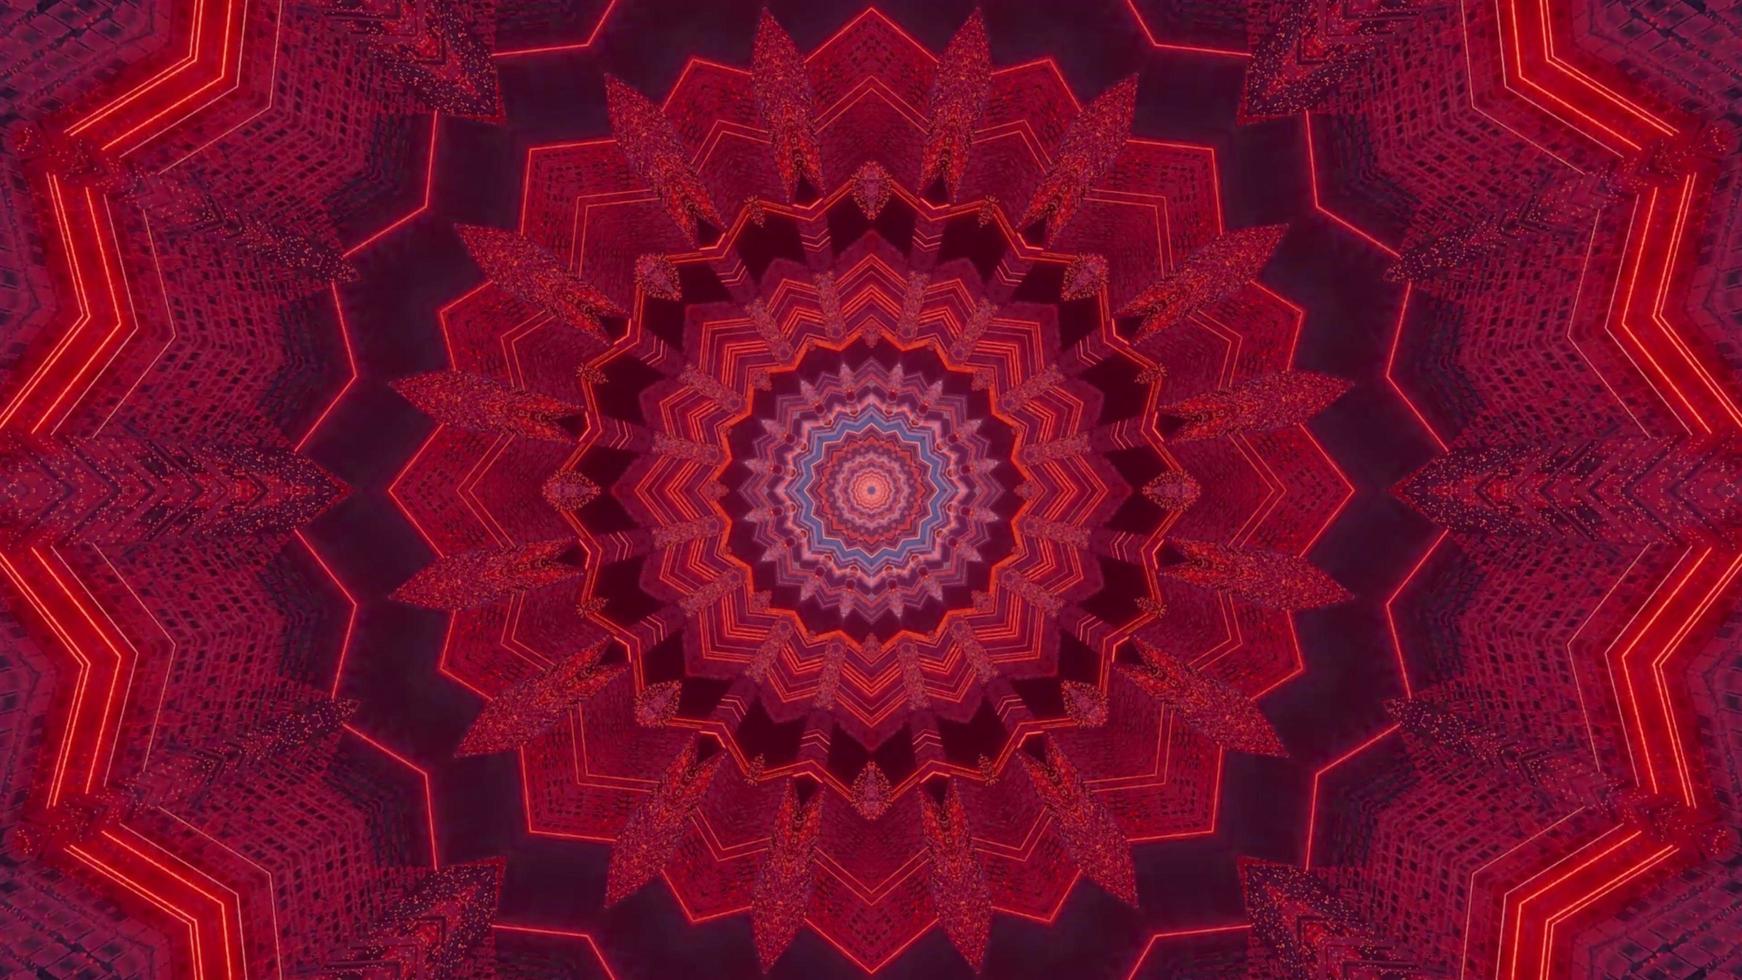 Blue and red floral 3D kaleidoscope design illustration for background or texture photo